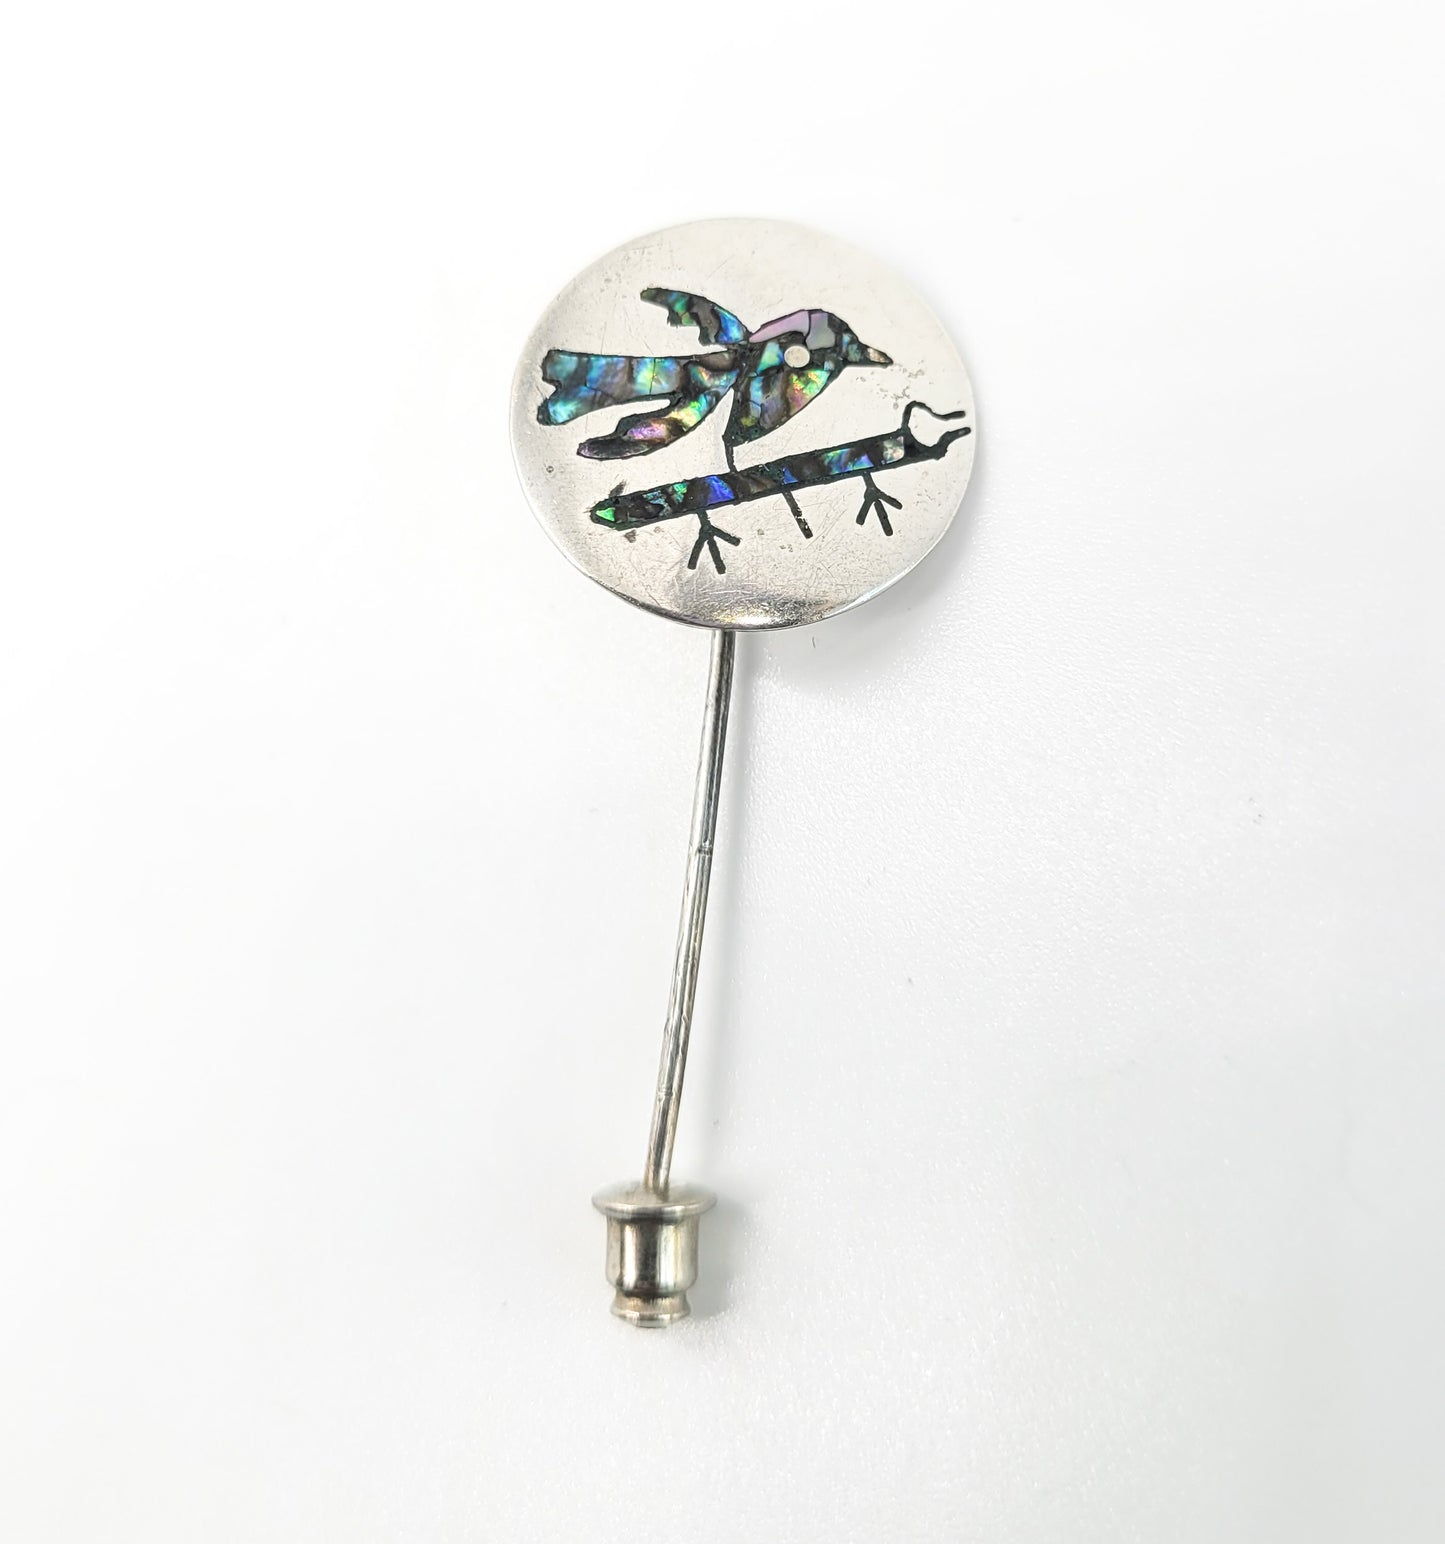 Abalone bird vintage sterling silver Taxco Mexico lapel pin brooch